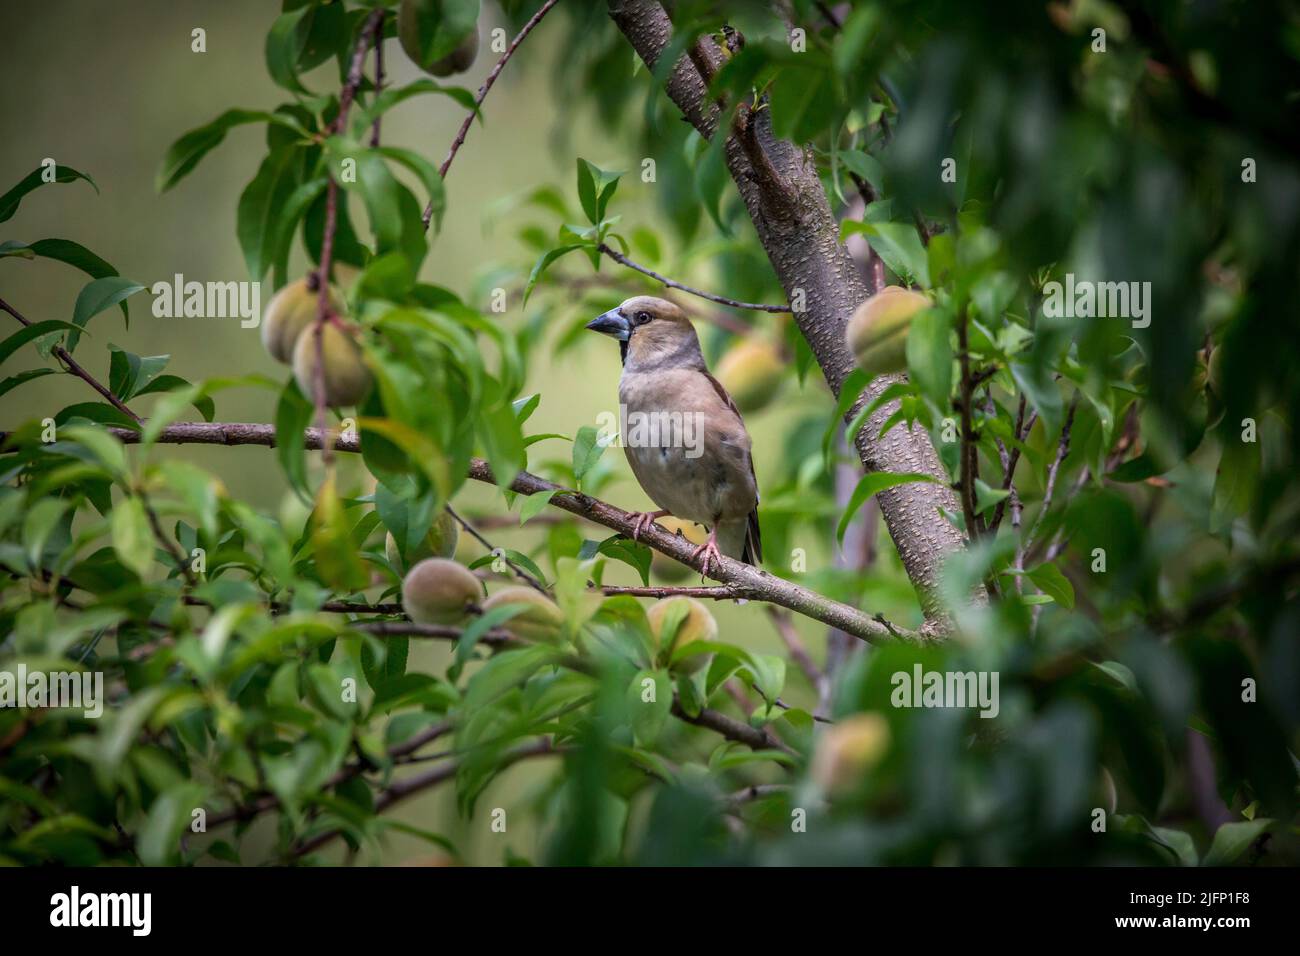 Hawfinch (Coccothraustes coccothraustes) Stock Photo